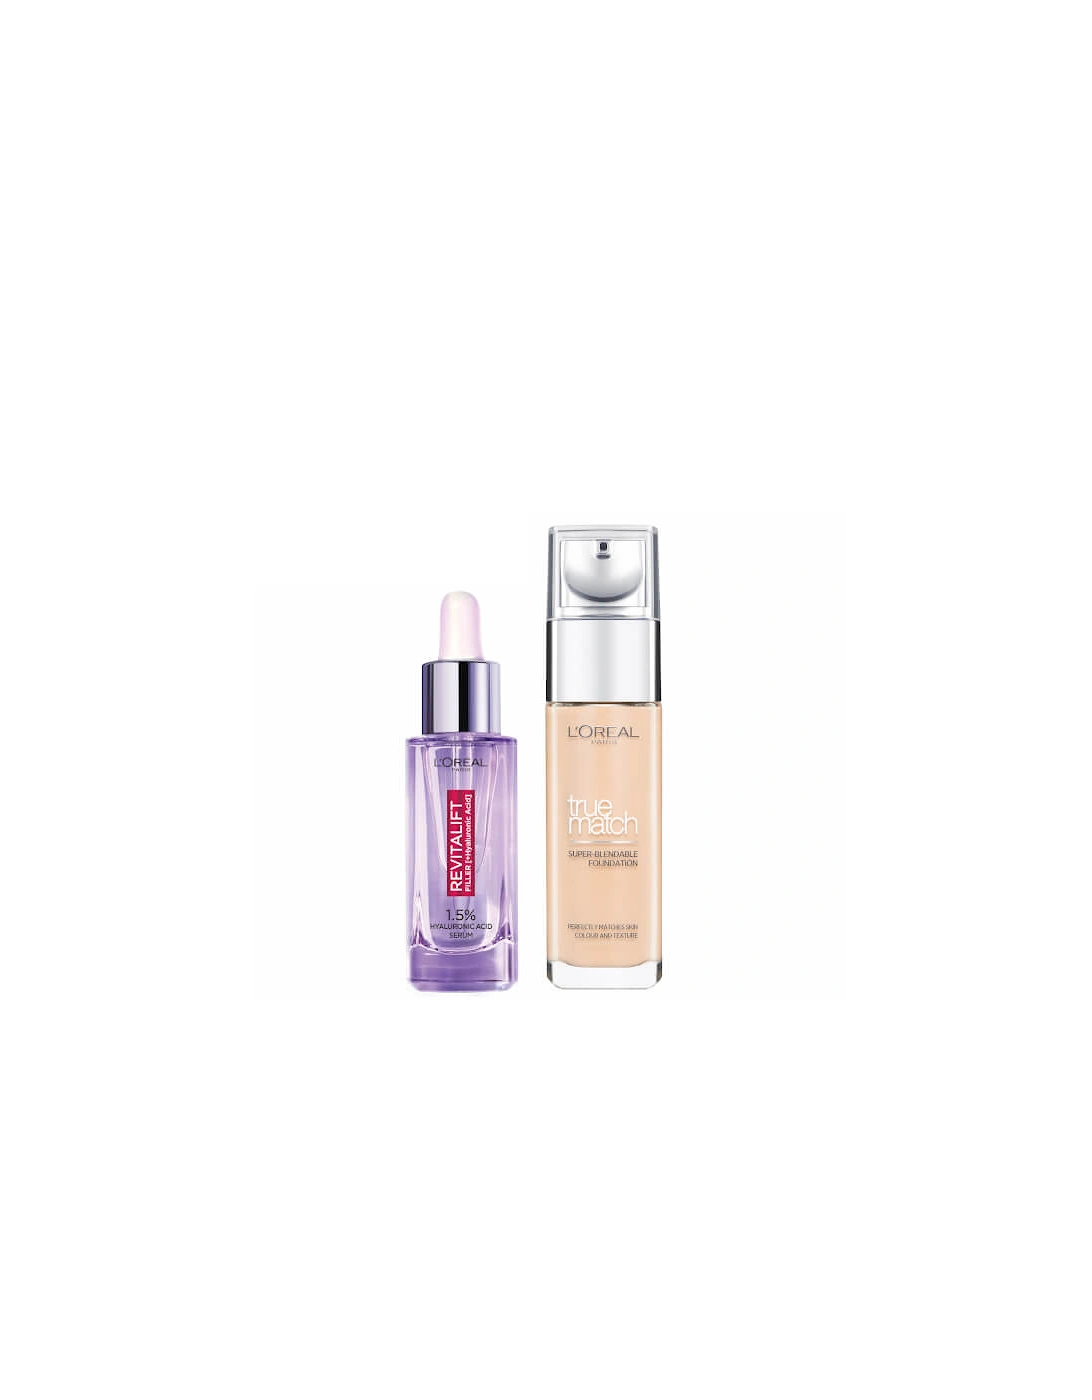 L’Oreal Paris Hyaluronic Acid Filler Serum and True Match Hyaluronic Acid Foundation Duo - 3C Rose Beige, 2 of 1